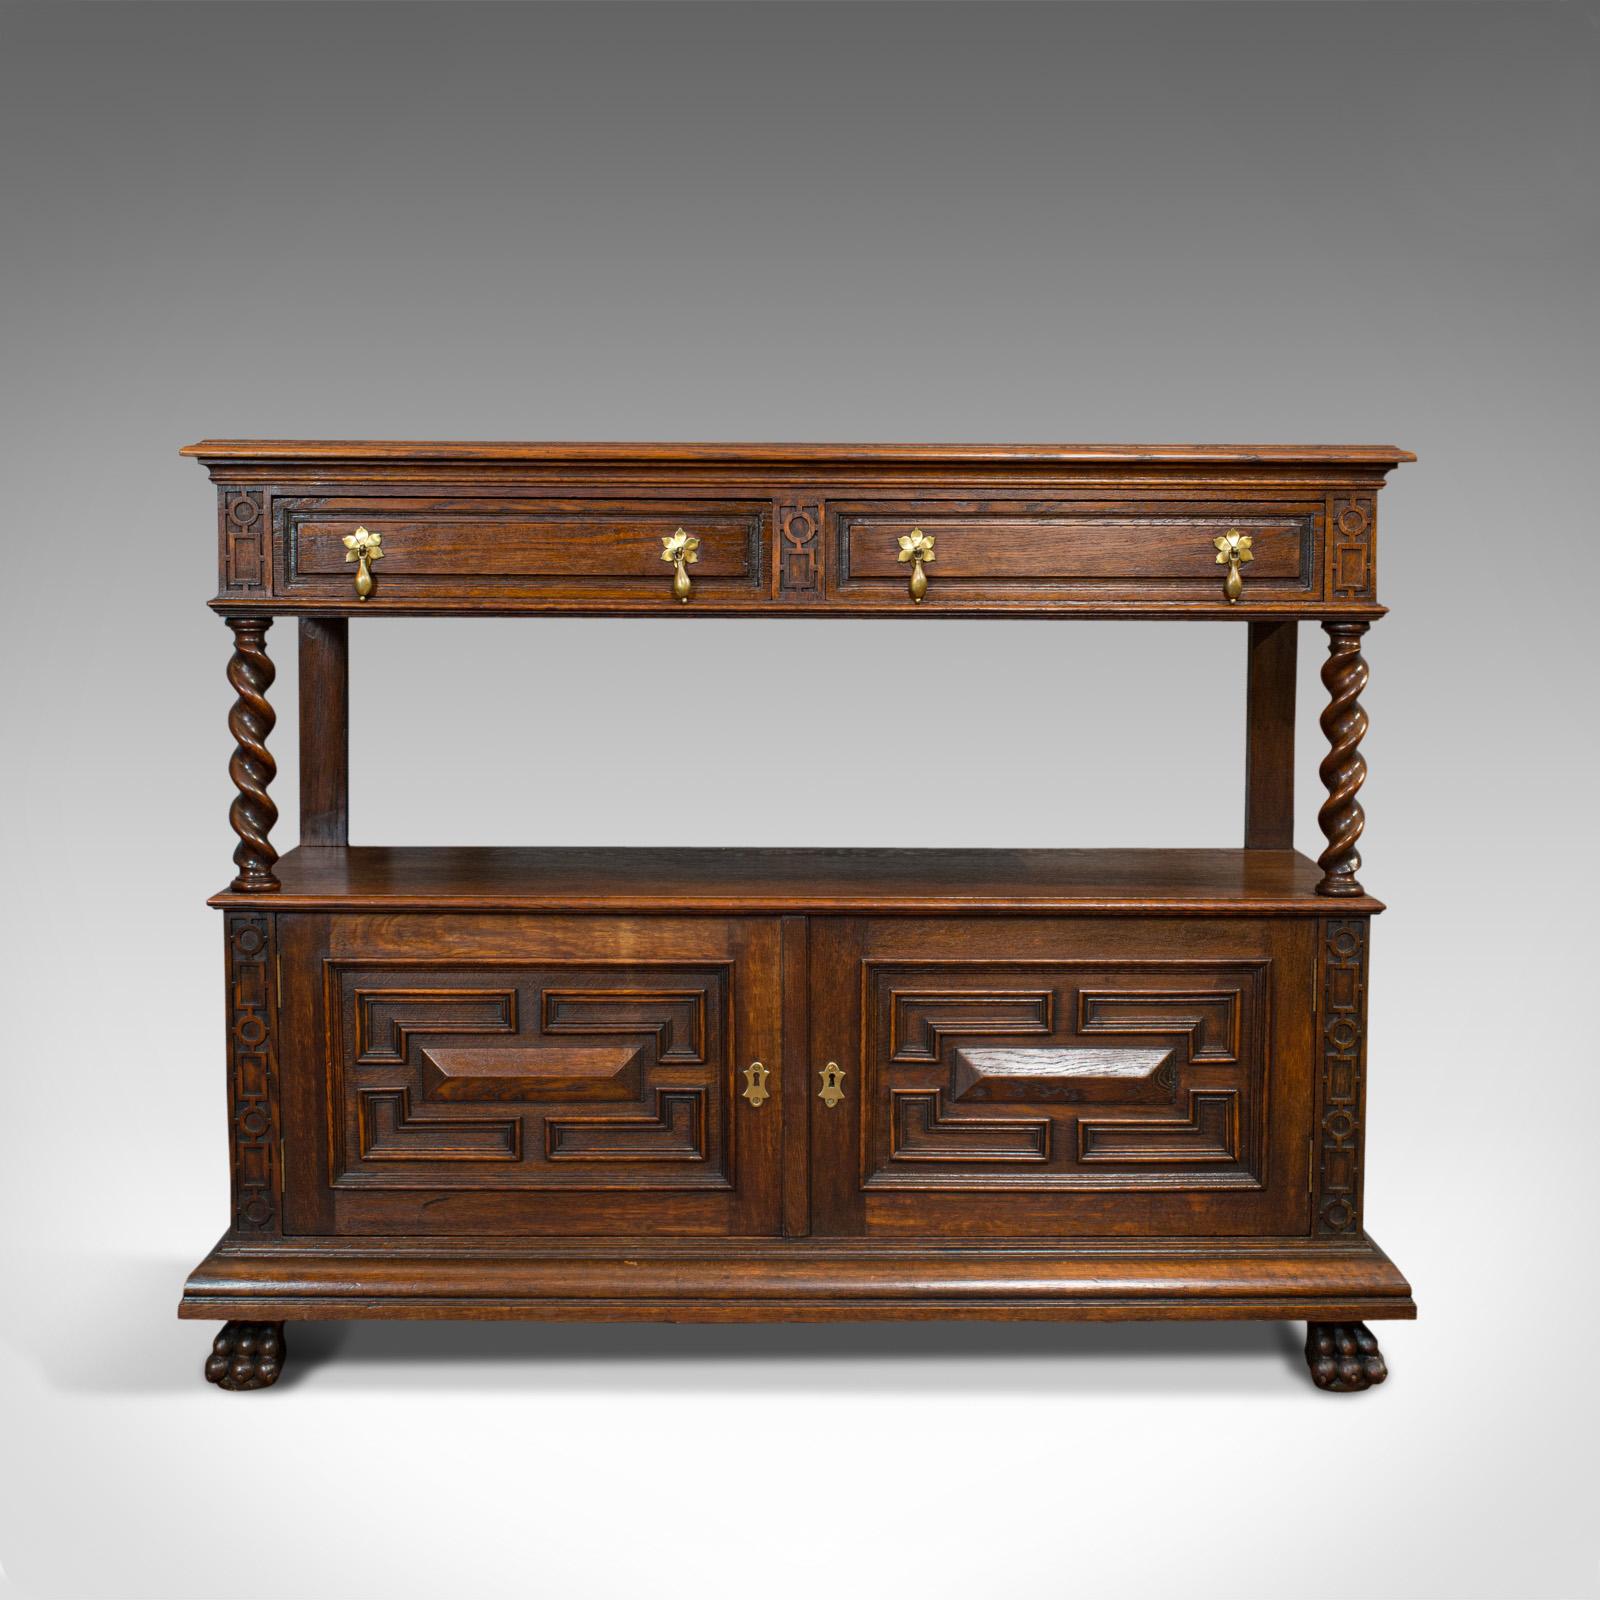 This is a large antique buffet. An English, oak server or sideboard in Jacobean revival taste, dating to the late Victorian period, circa 1880.

Classic buffet with striking detail
Displays a desirable aged patina
Oak stocks shows fine grain